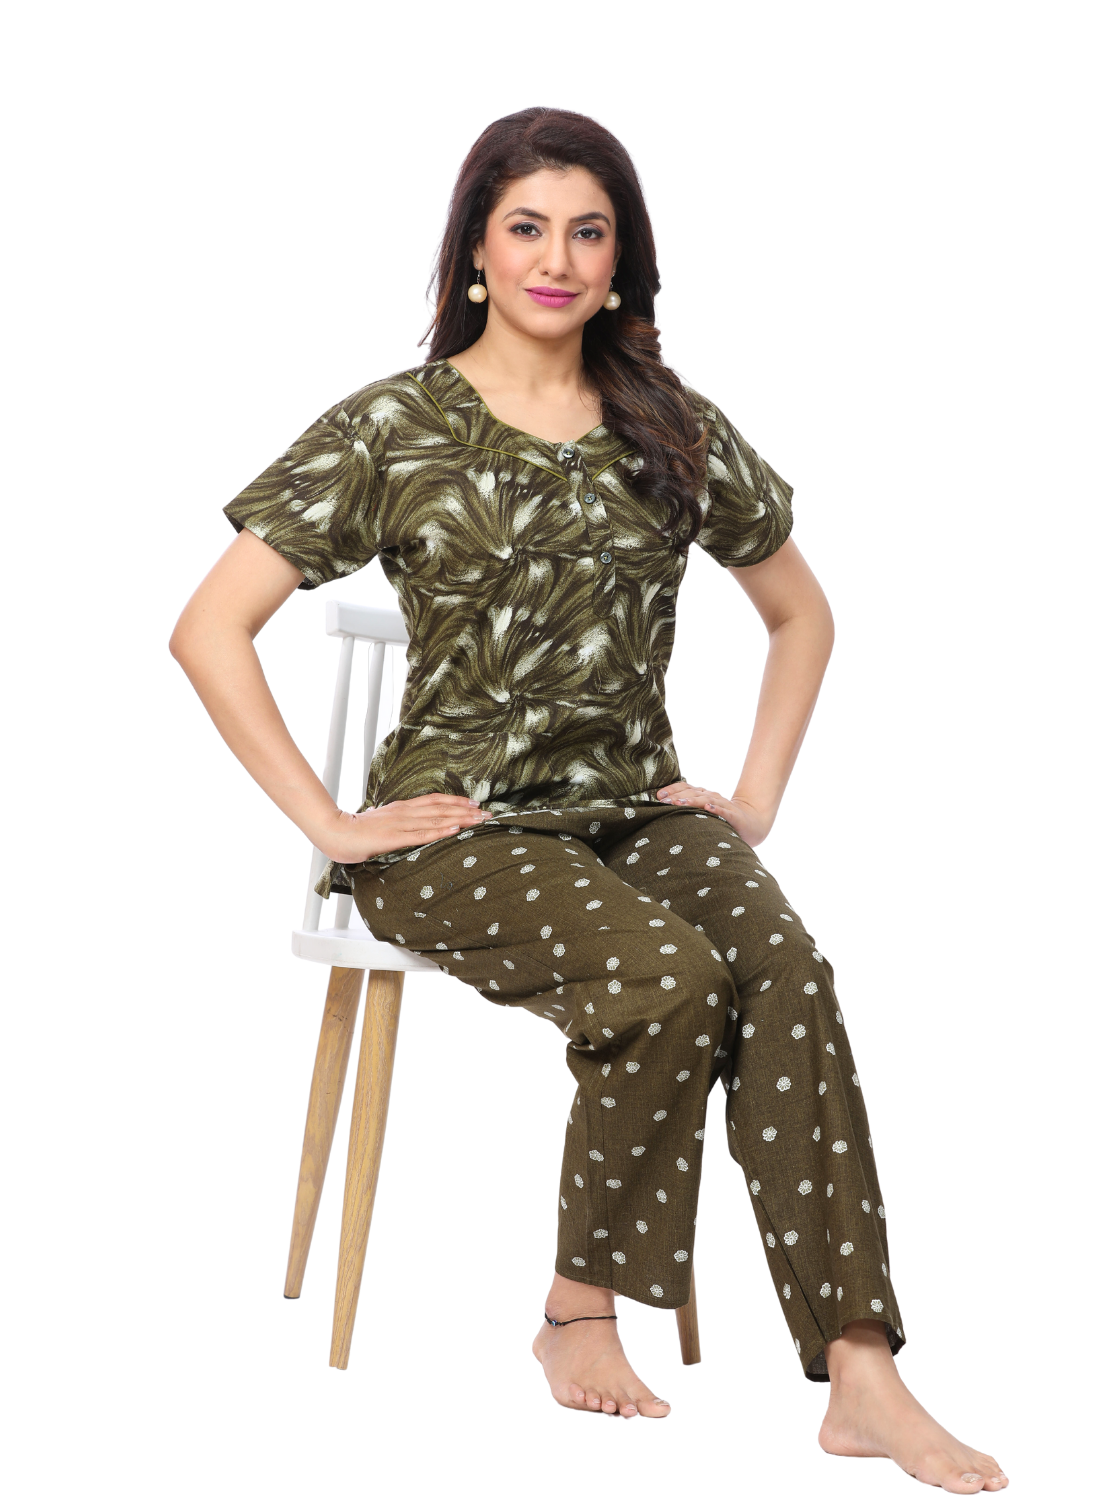 ONLY MINE Summer Arrival Premium Cotton Night Suits - Latest Collection's Top & Bottom Set